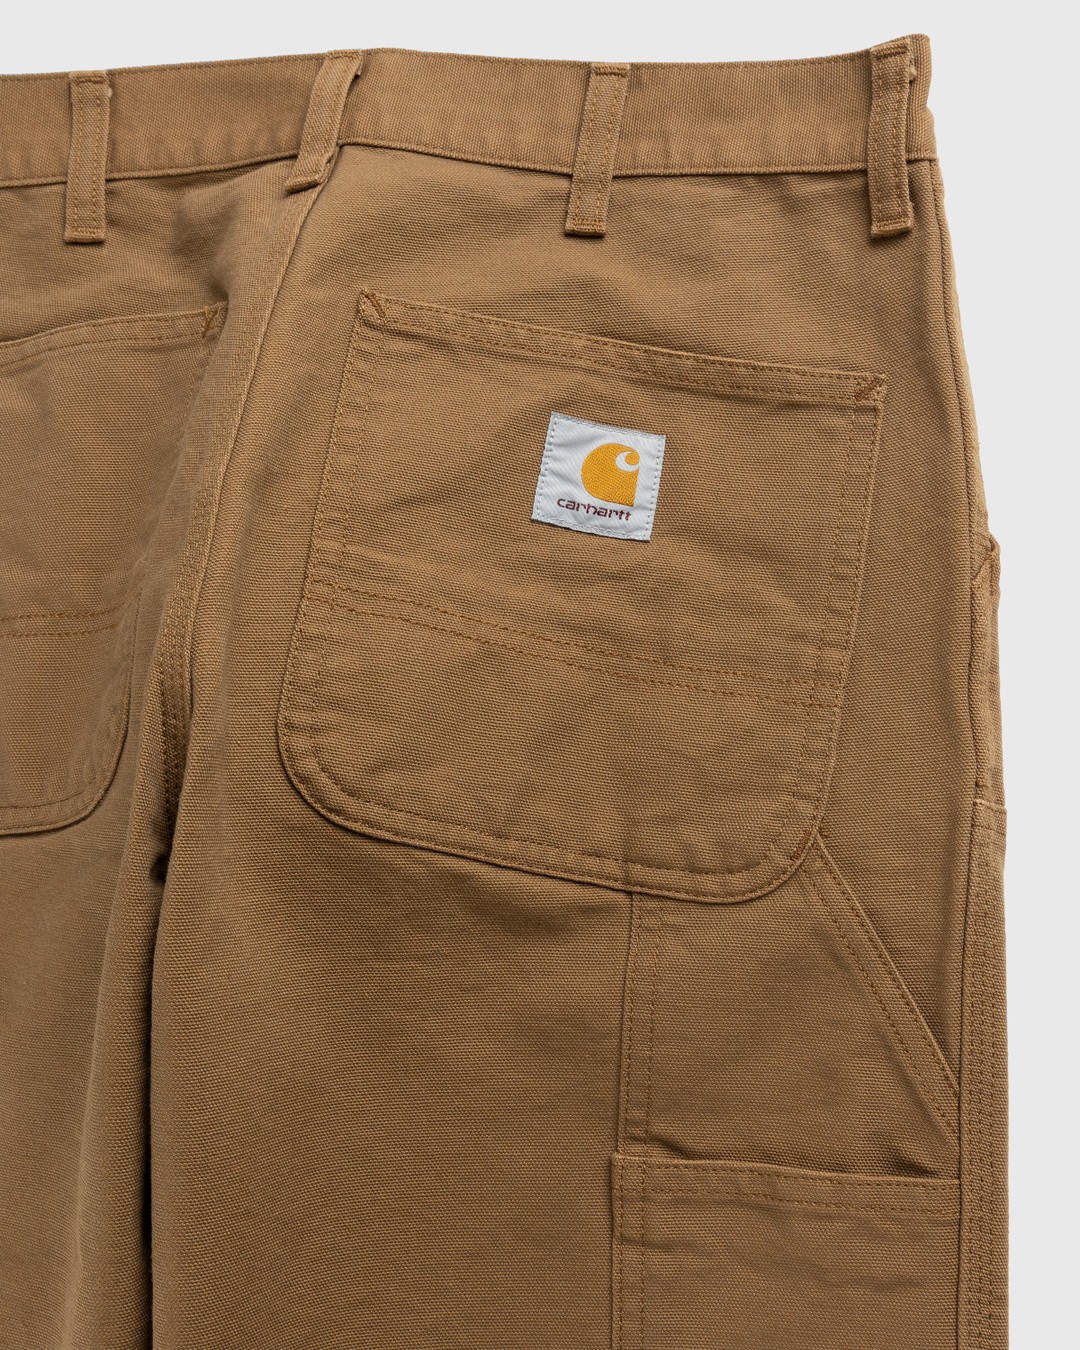 pavement package propeller Carhartt WIP – Double Knee Pant Brown | Highsnobiety Shop